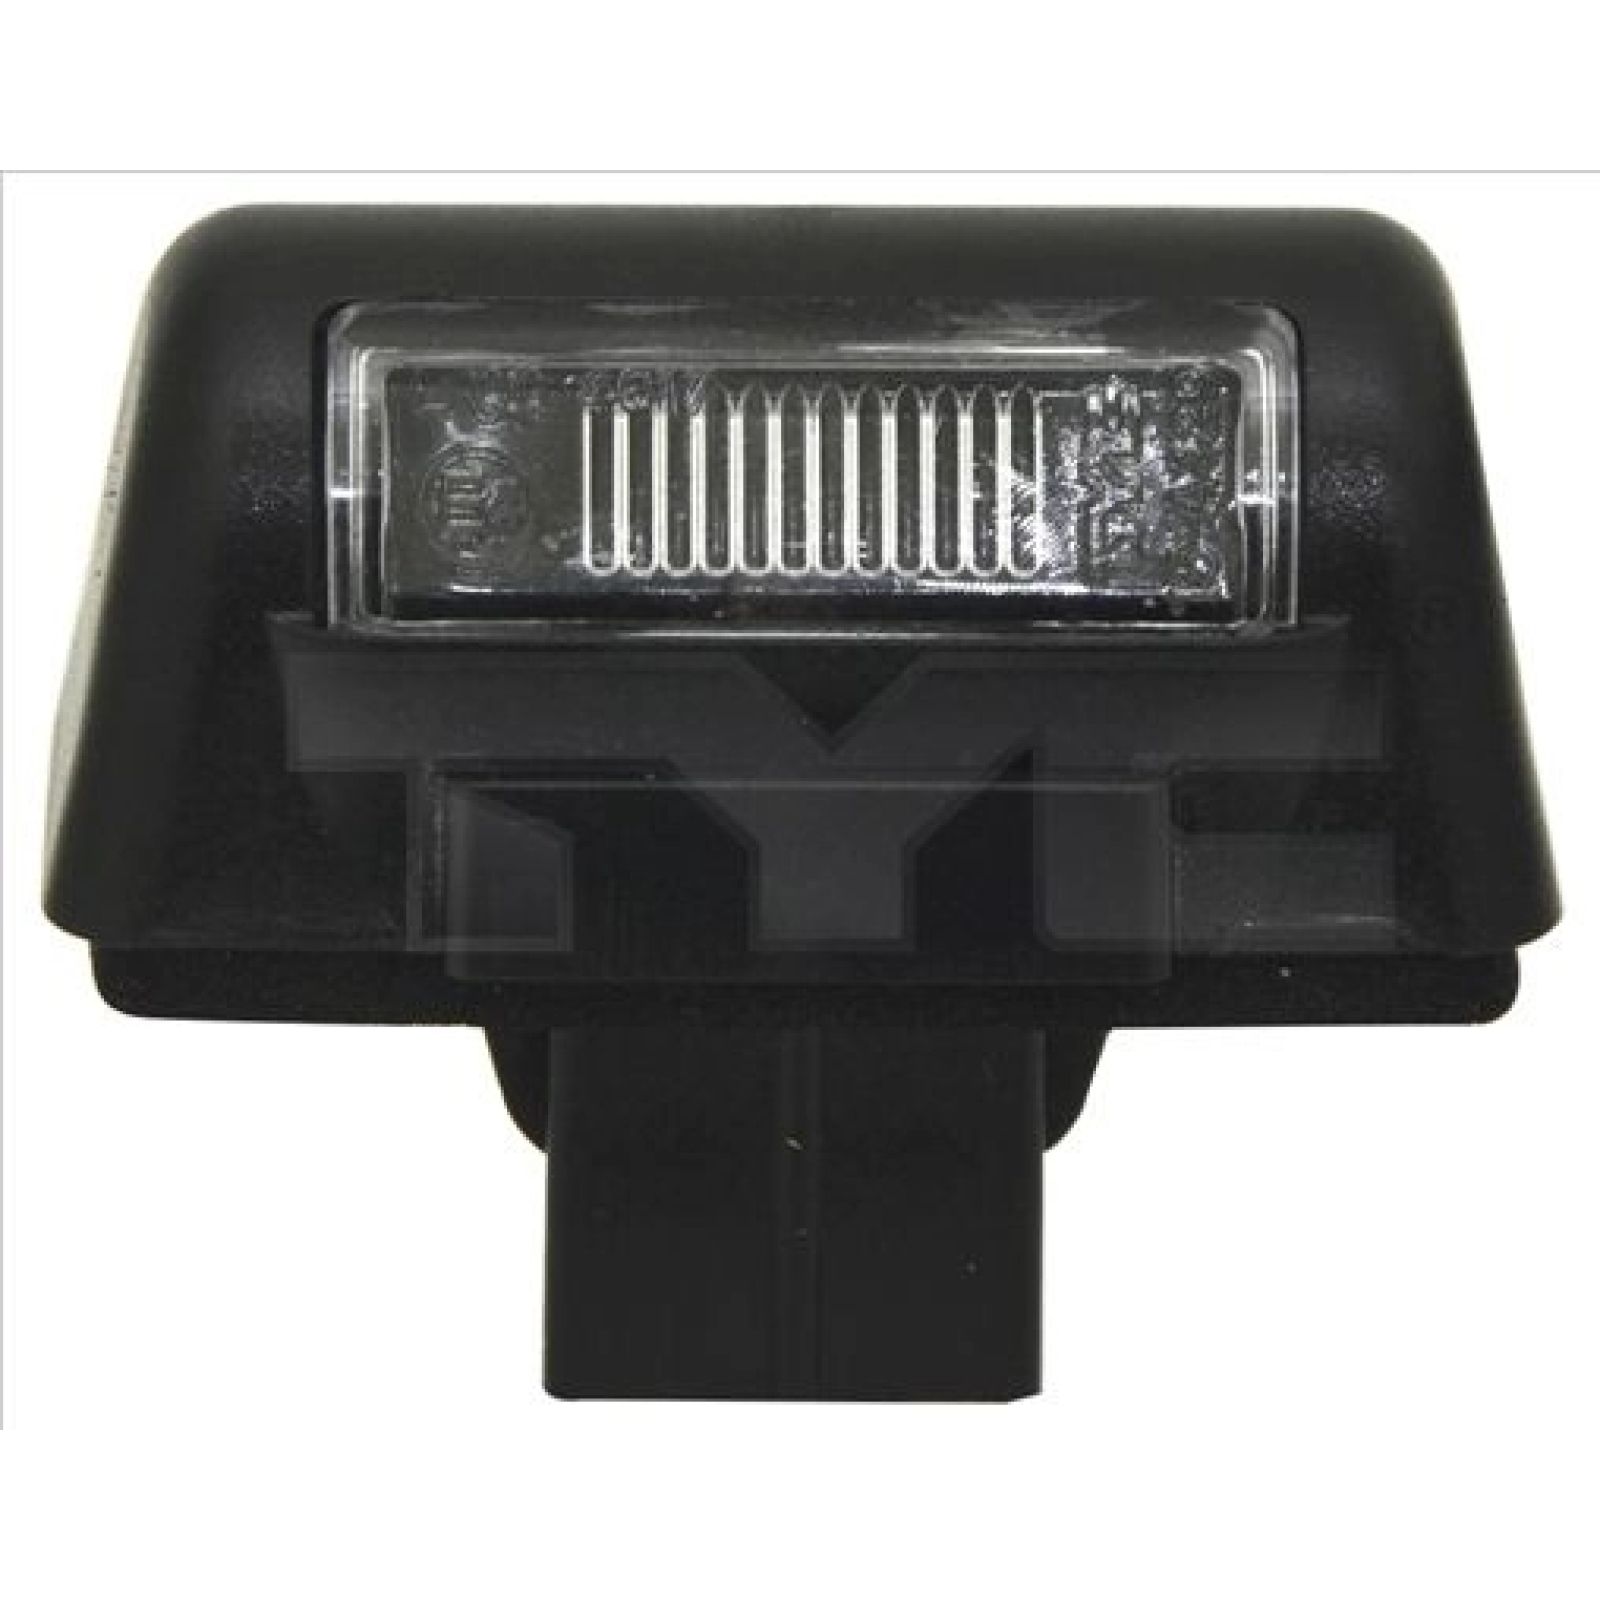 https://www.autoteile-store.at/img/product/kennzeichenleuchte-w5w-ford-transit-van-100-714connecttourneo-602-113-25090850-140792/66d4e13144451c701a0653fc52f9ee1d_1600.jpg